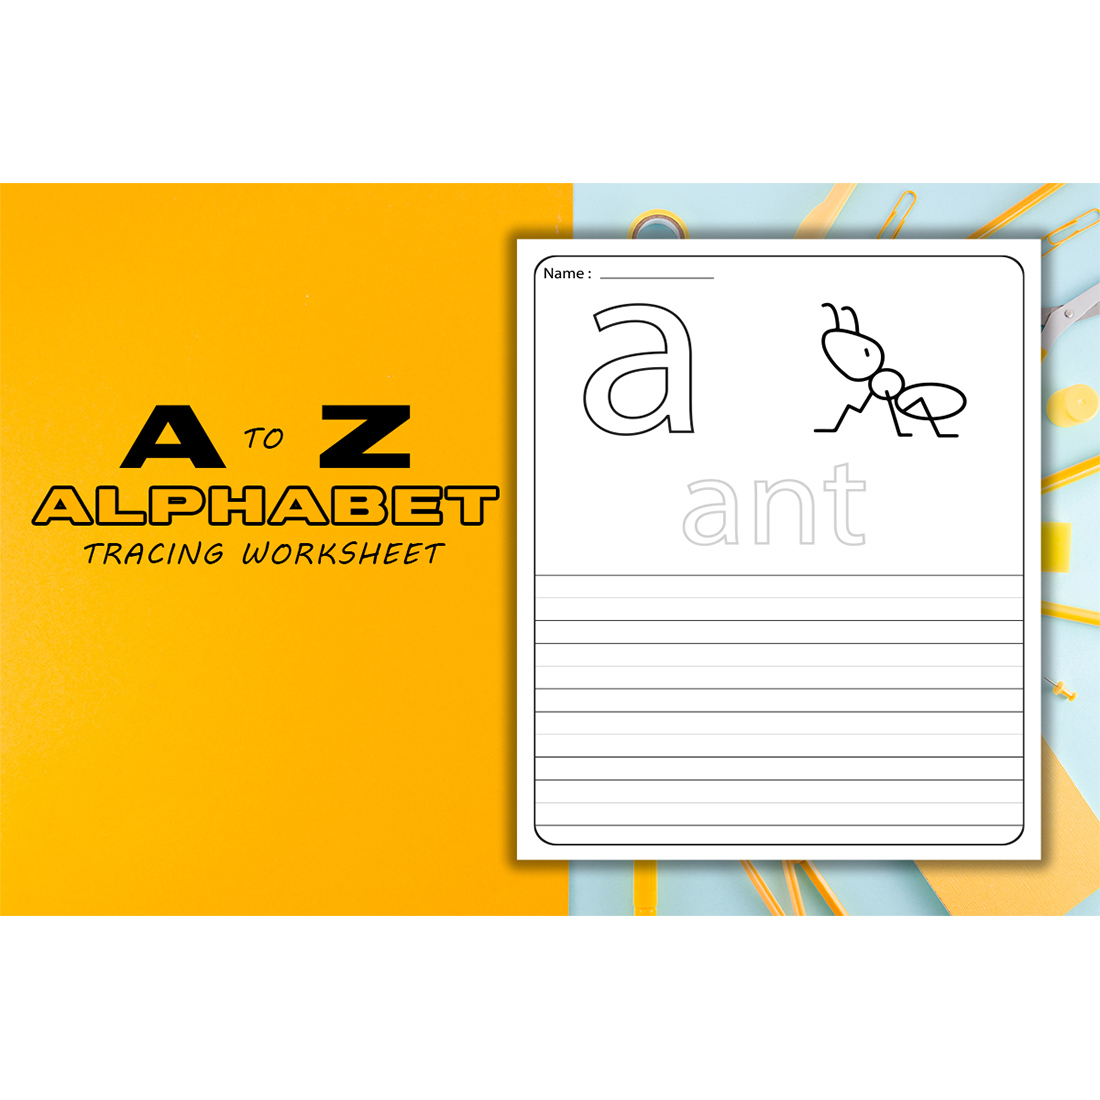 An image of an elegant worksheet for learning the letter a